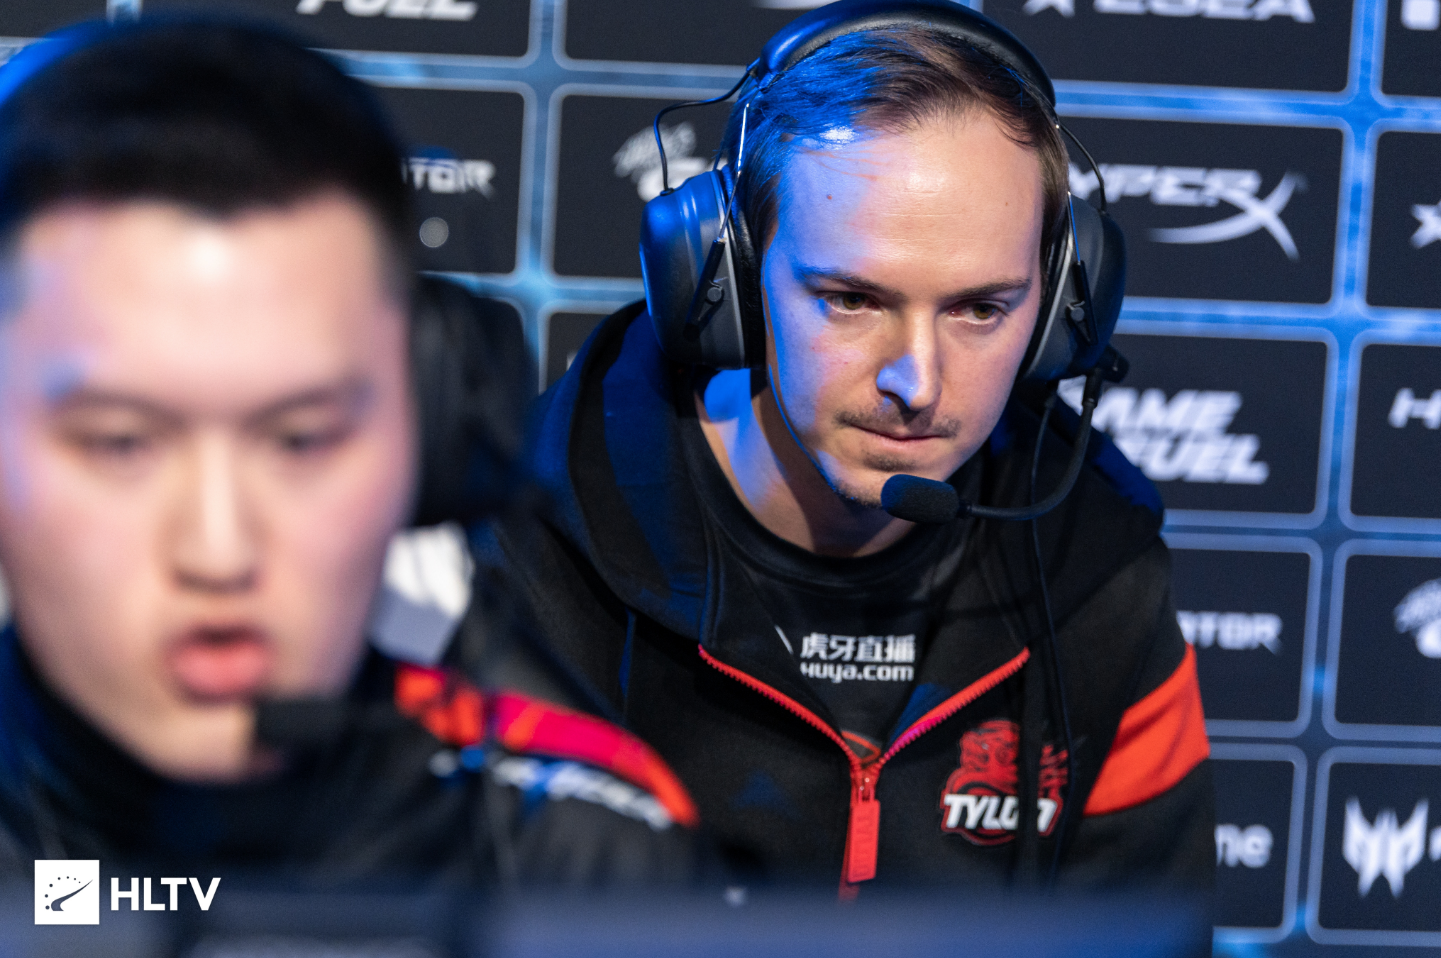 Johnta joining FPX as VALORANT coach